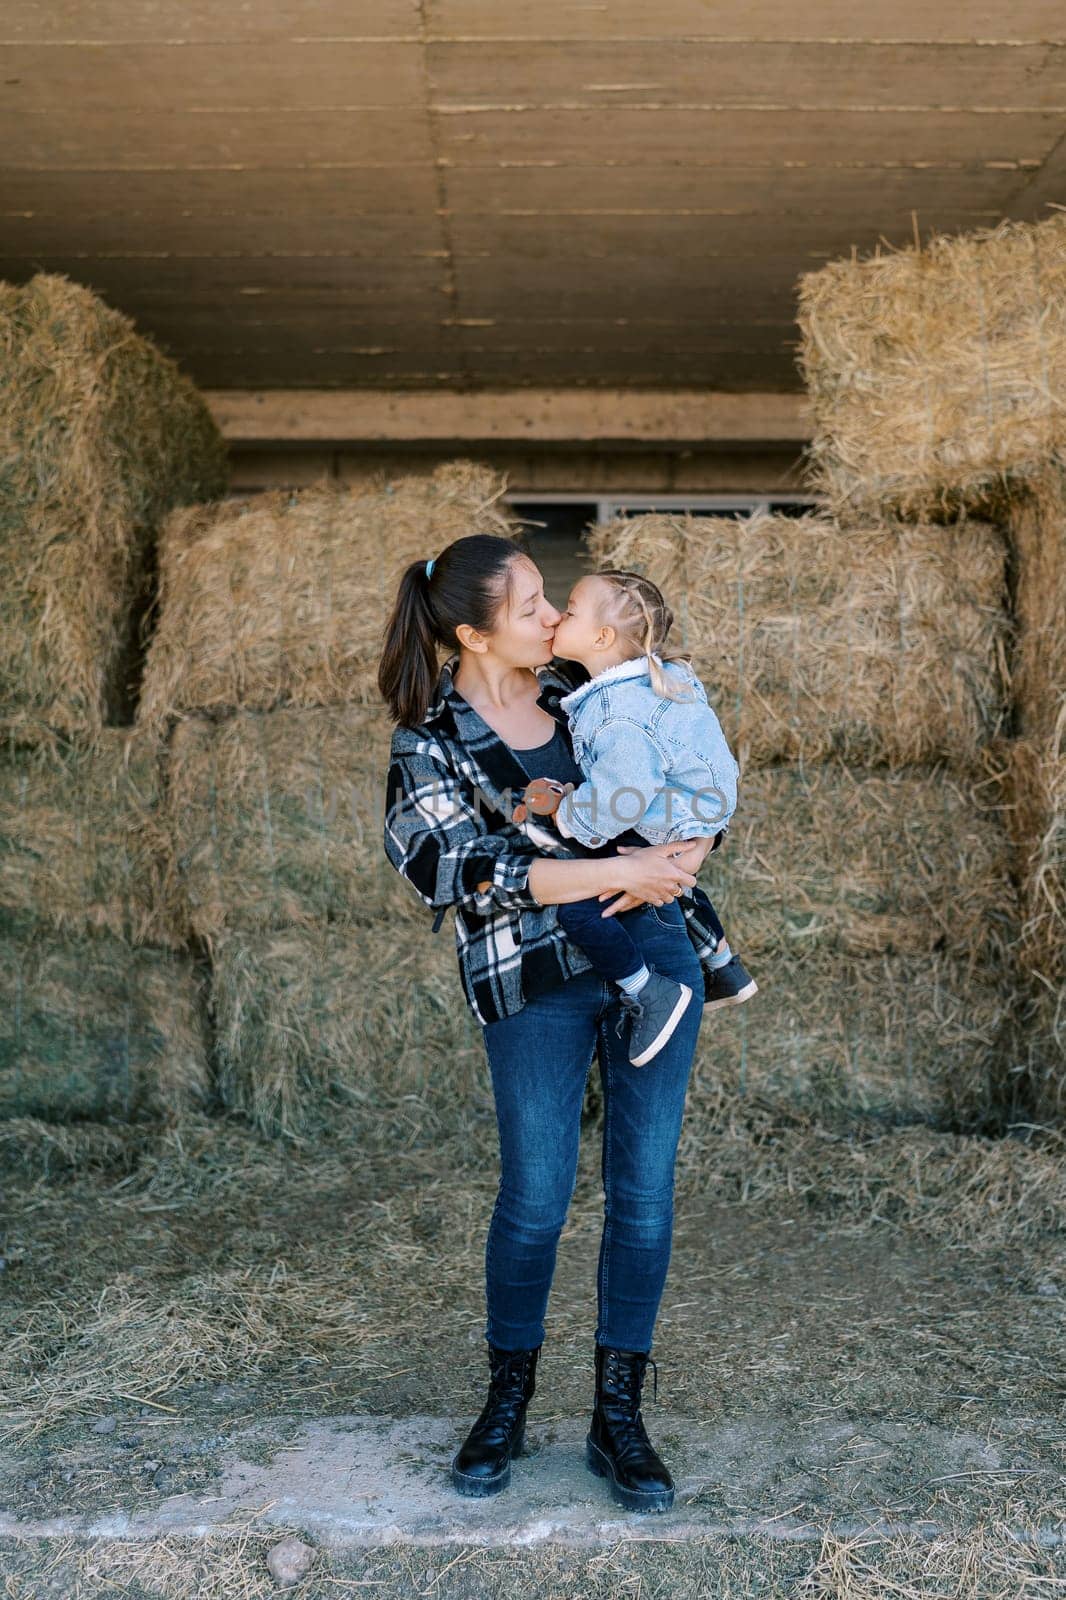 Mom kisses a little girl in her arms standing in the hayloft. High quality photo